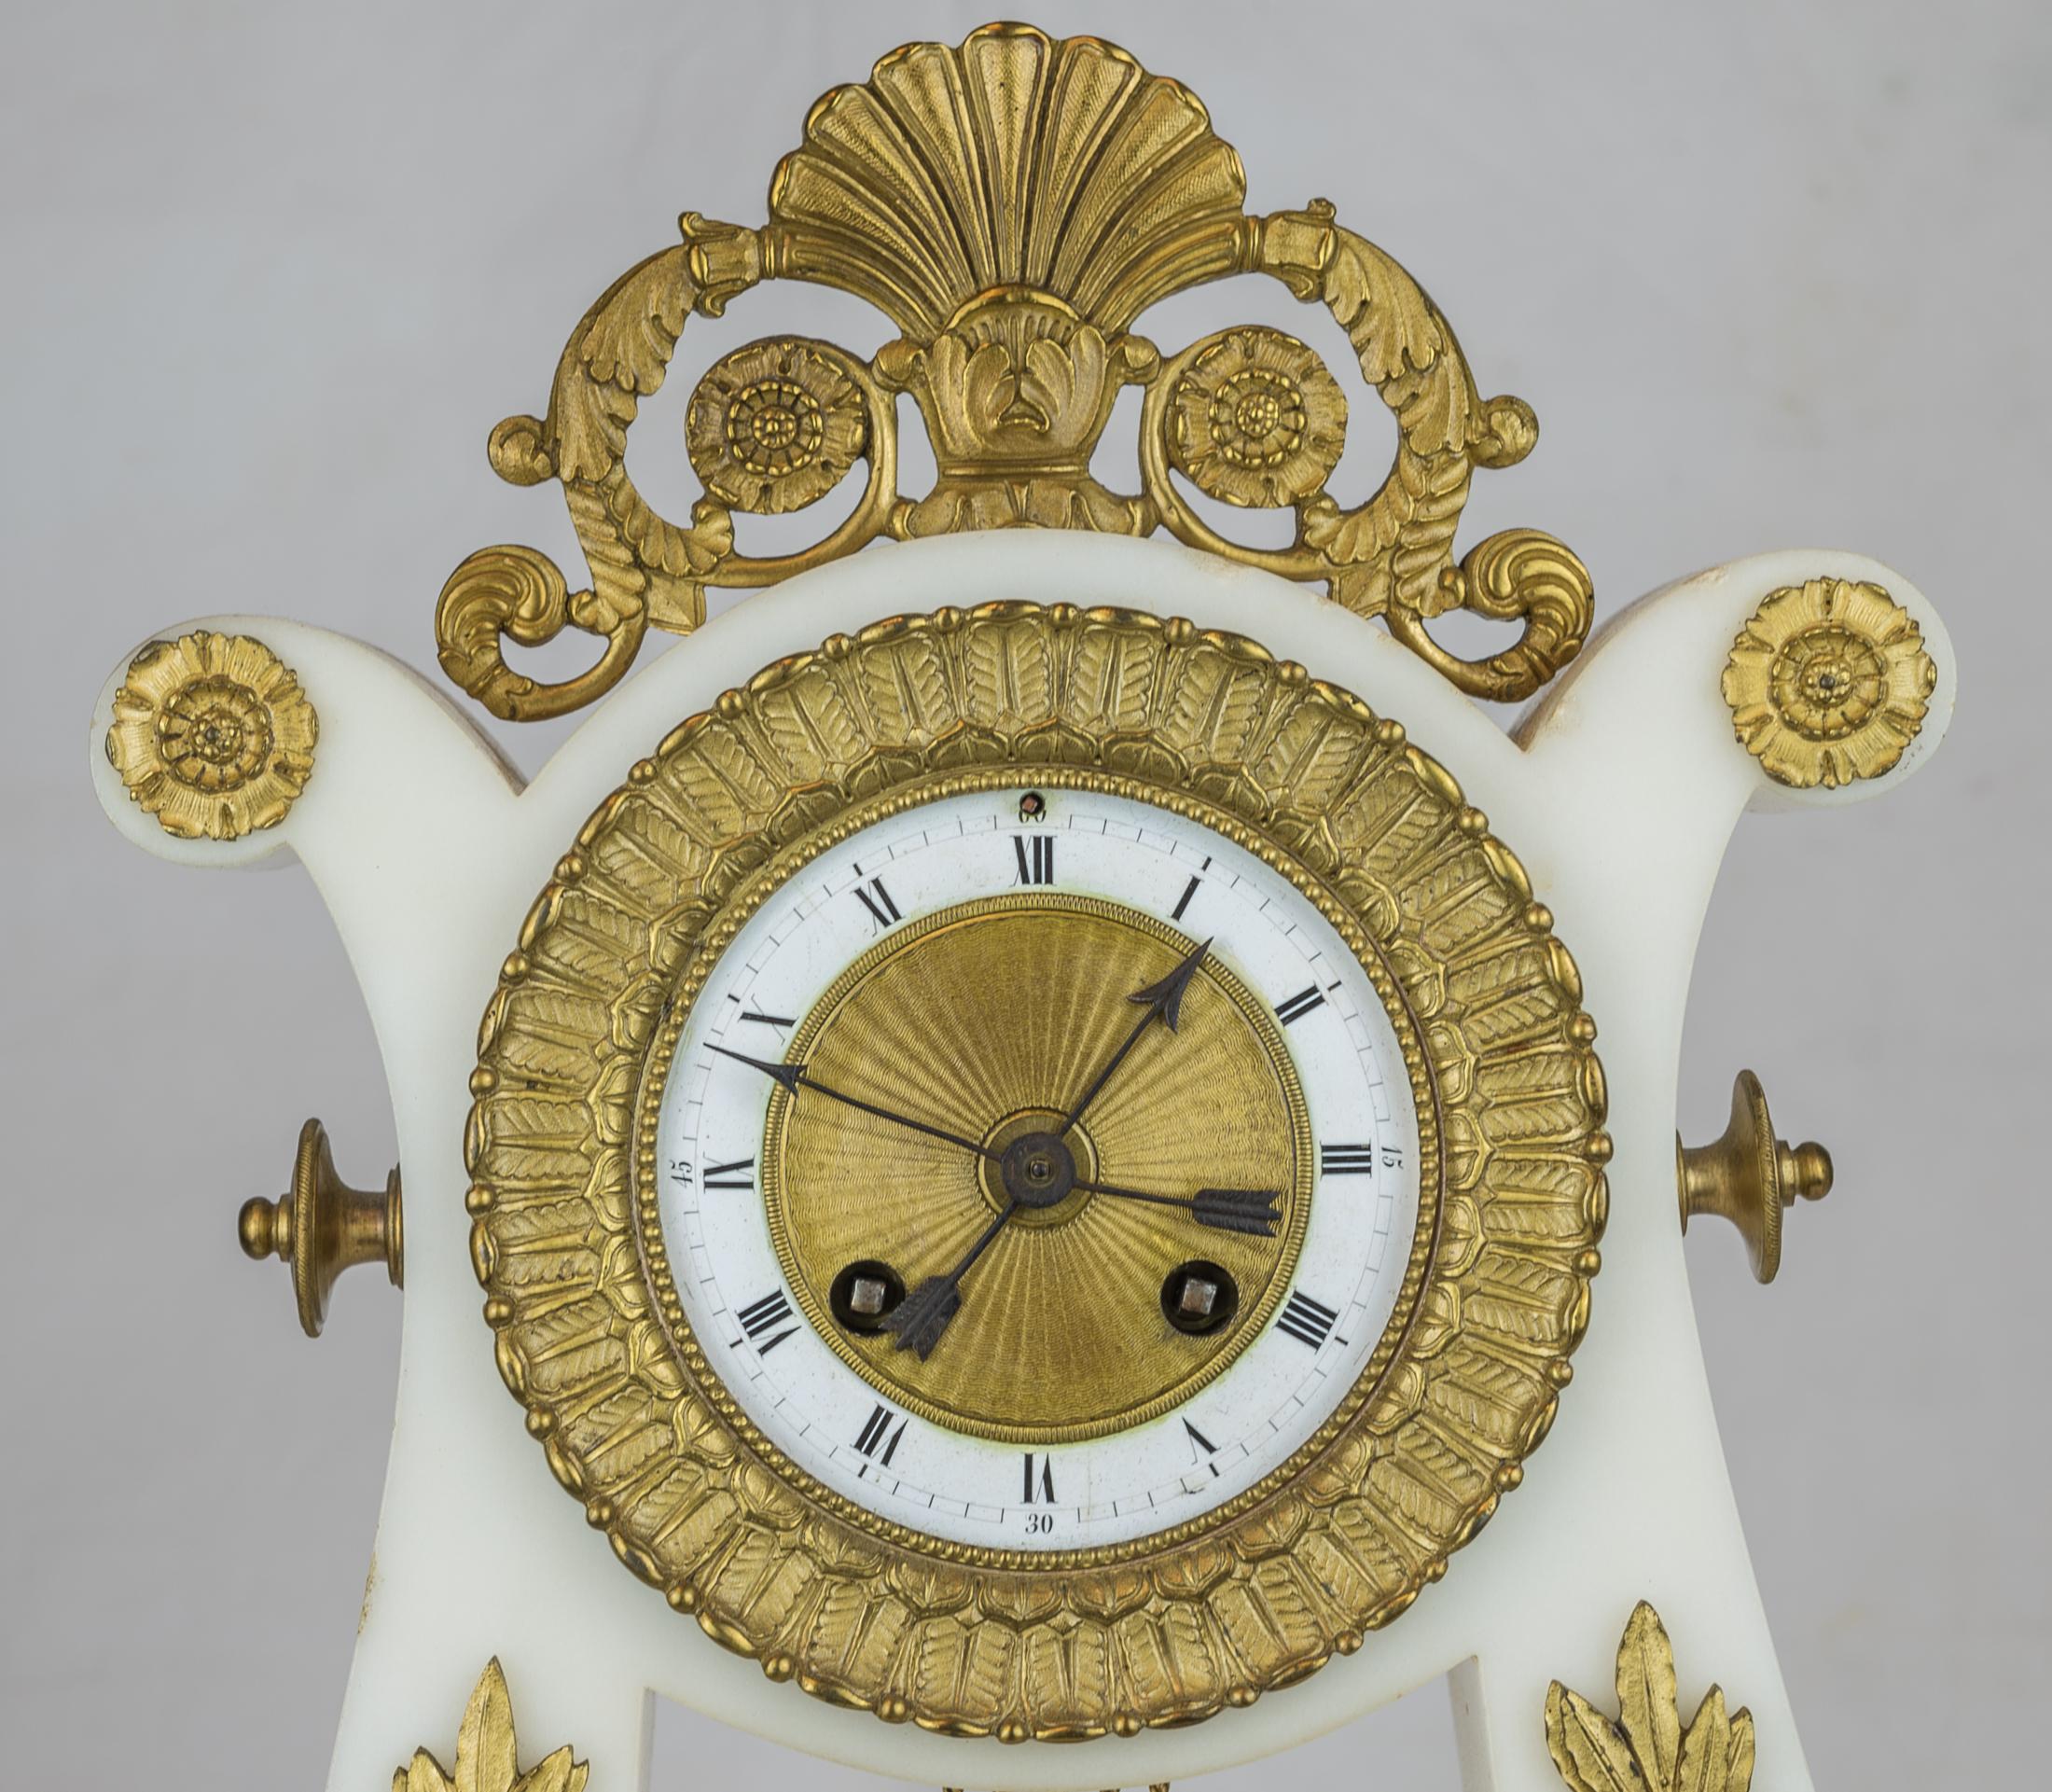 A Luxurious 19th century Empire style ormolu and white marble lyre clock garniture.
Known as a lyre clock for its graceful shape, this elegant piece is crafted with white marble and luxurious ormolu acanthus leaf and scroll in the Empire-style.